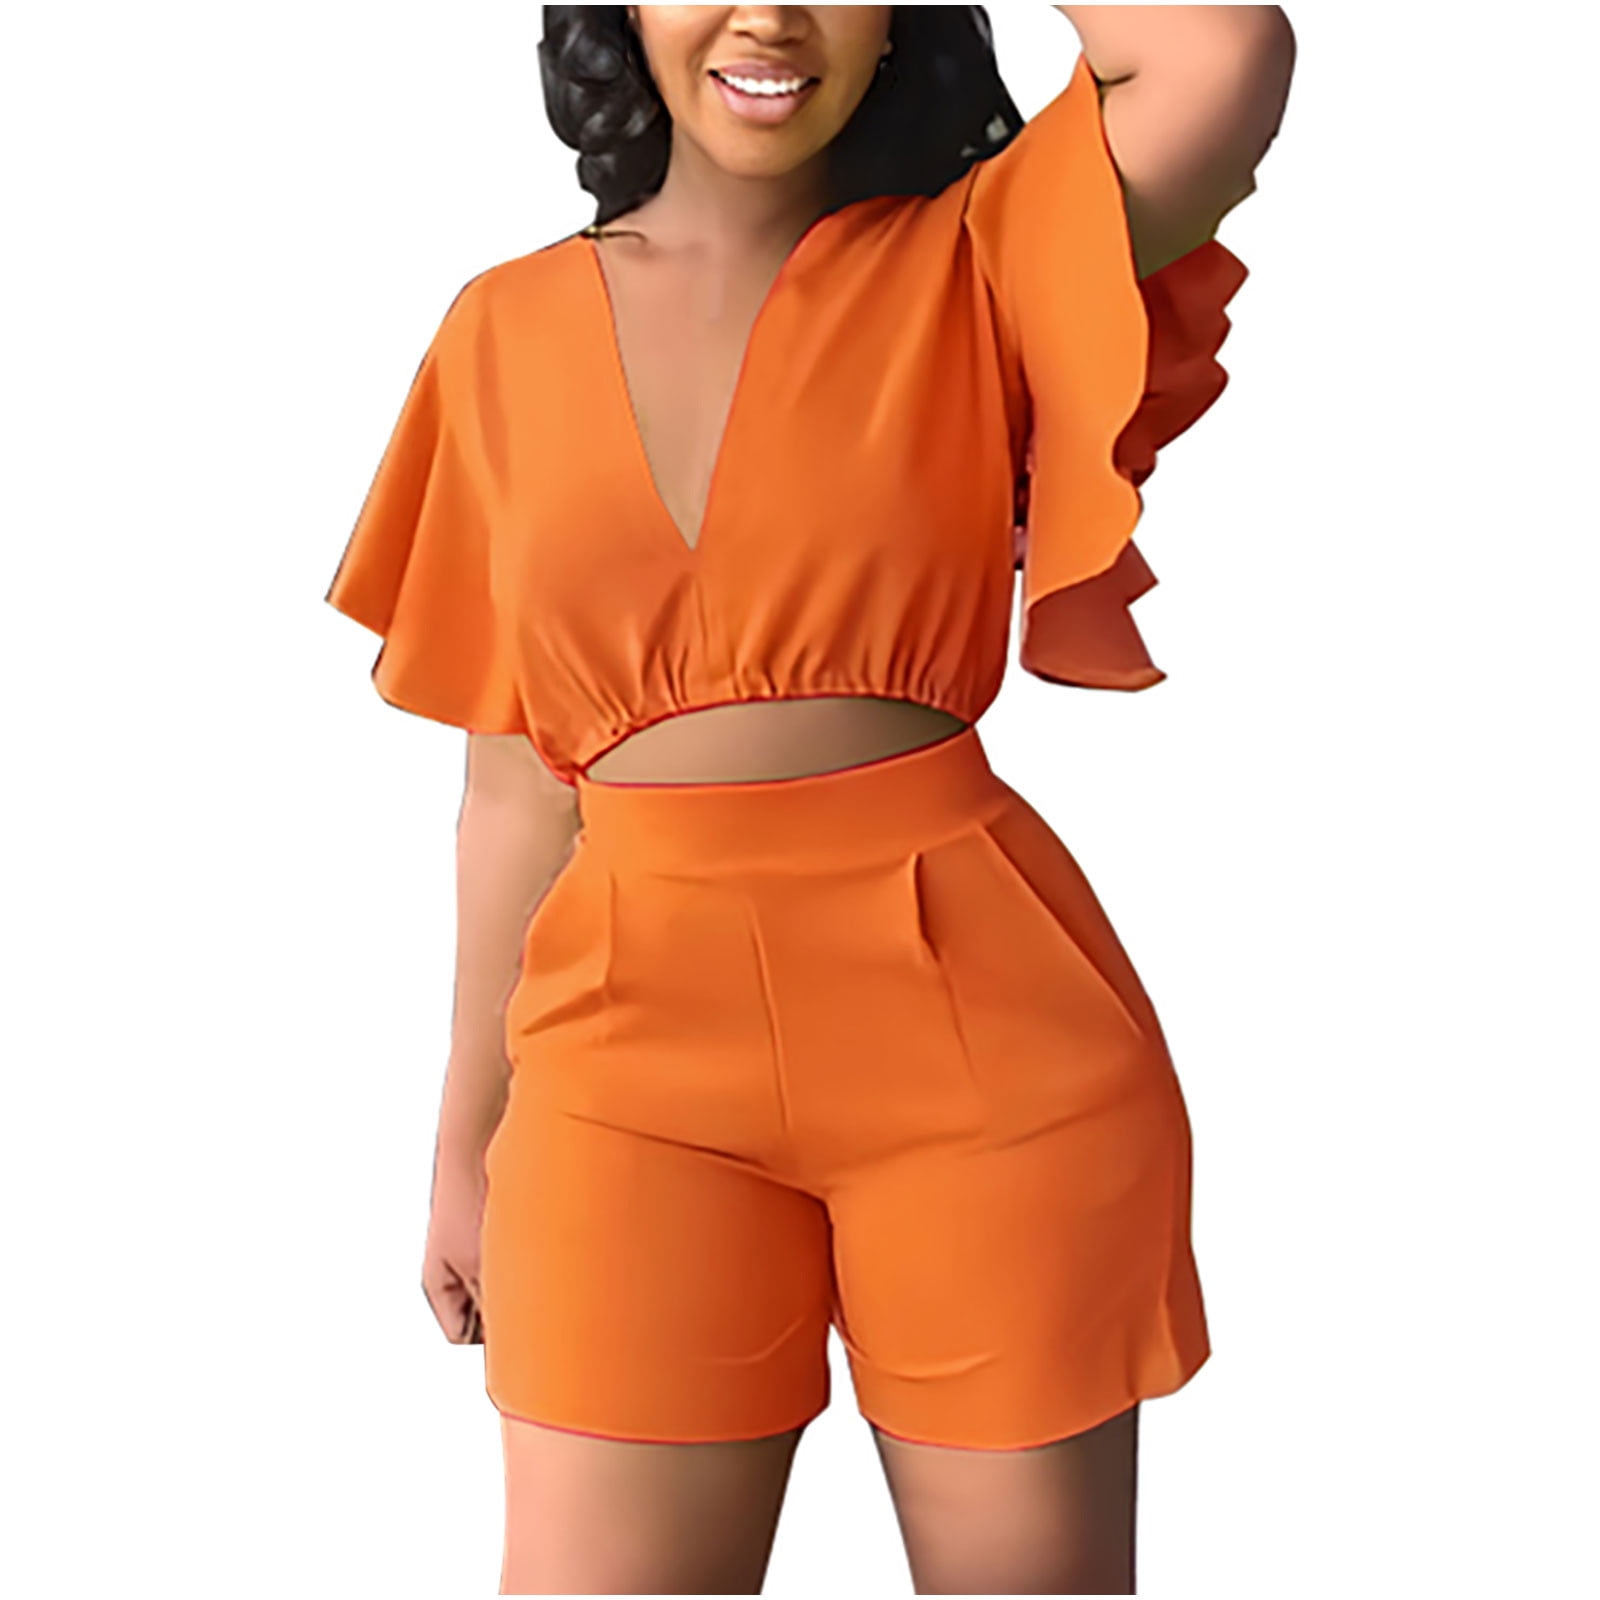 REORIAFEE Outfits for Women 90s Outfit Women's Ruffle Short